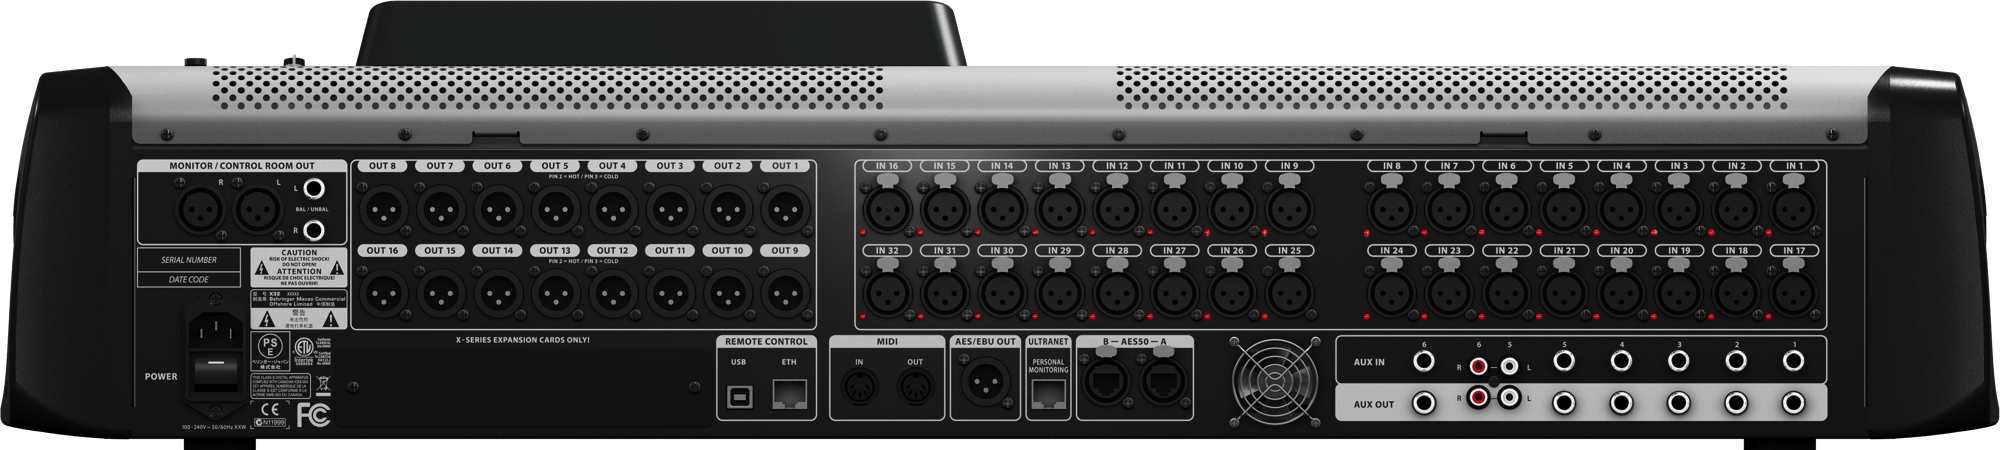 behringer-x32-digital-mixing-console-rear.png